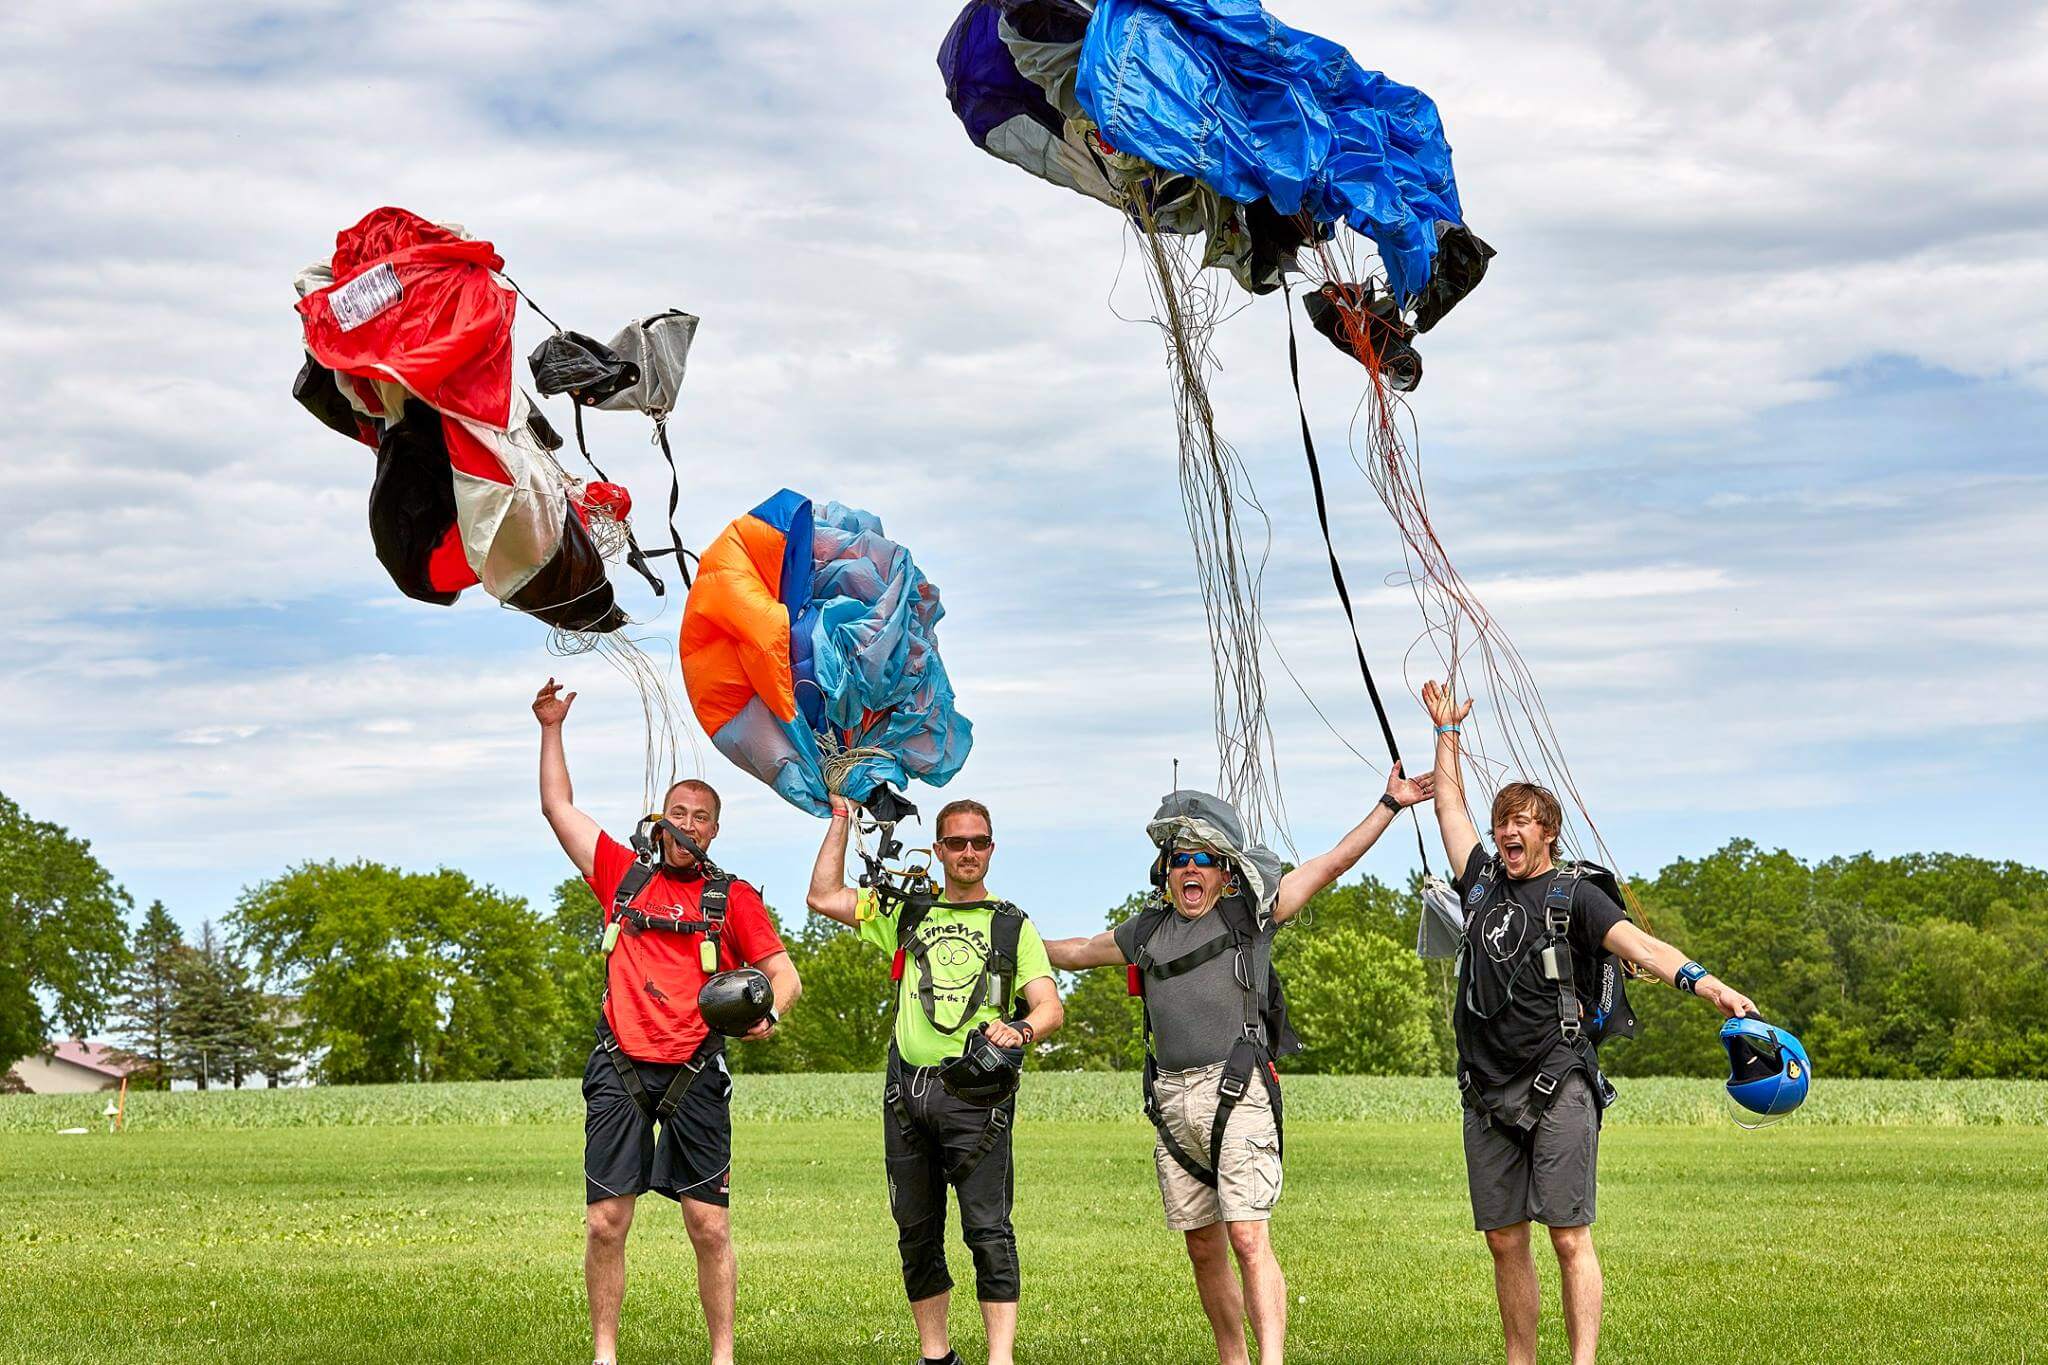 Experienced Seven Hills Skydivers of Madison, WI